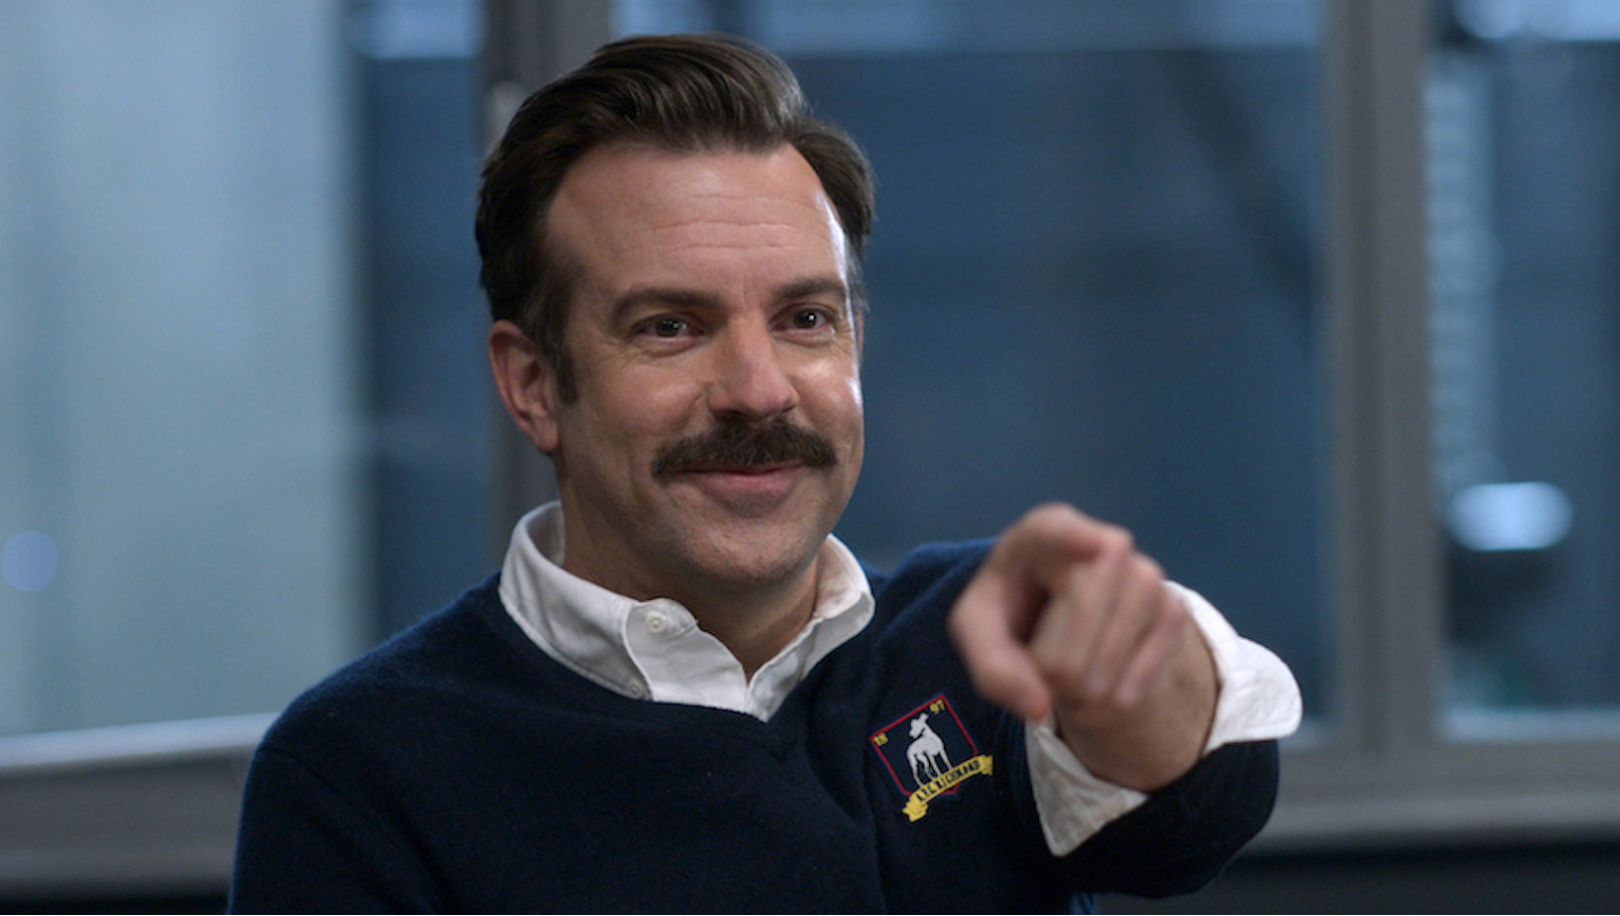 Ted lasso season 3 potential release date, cast and more